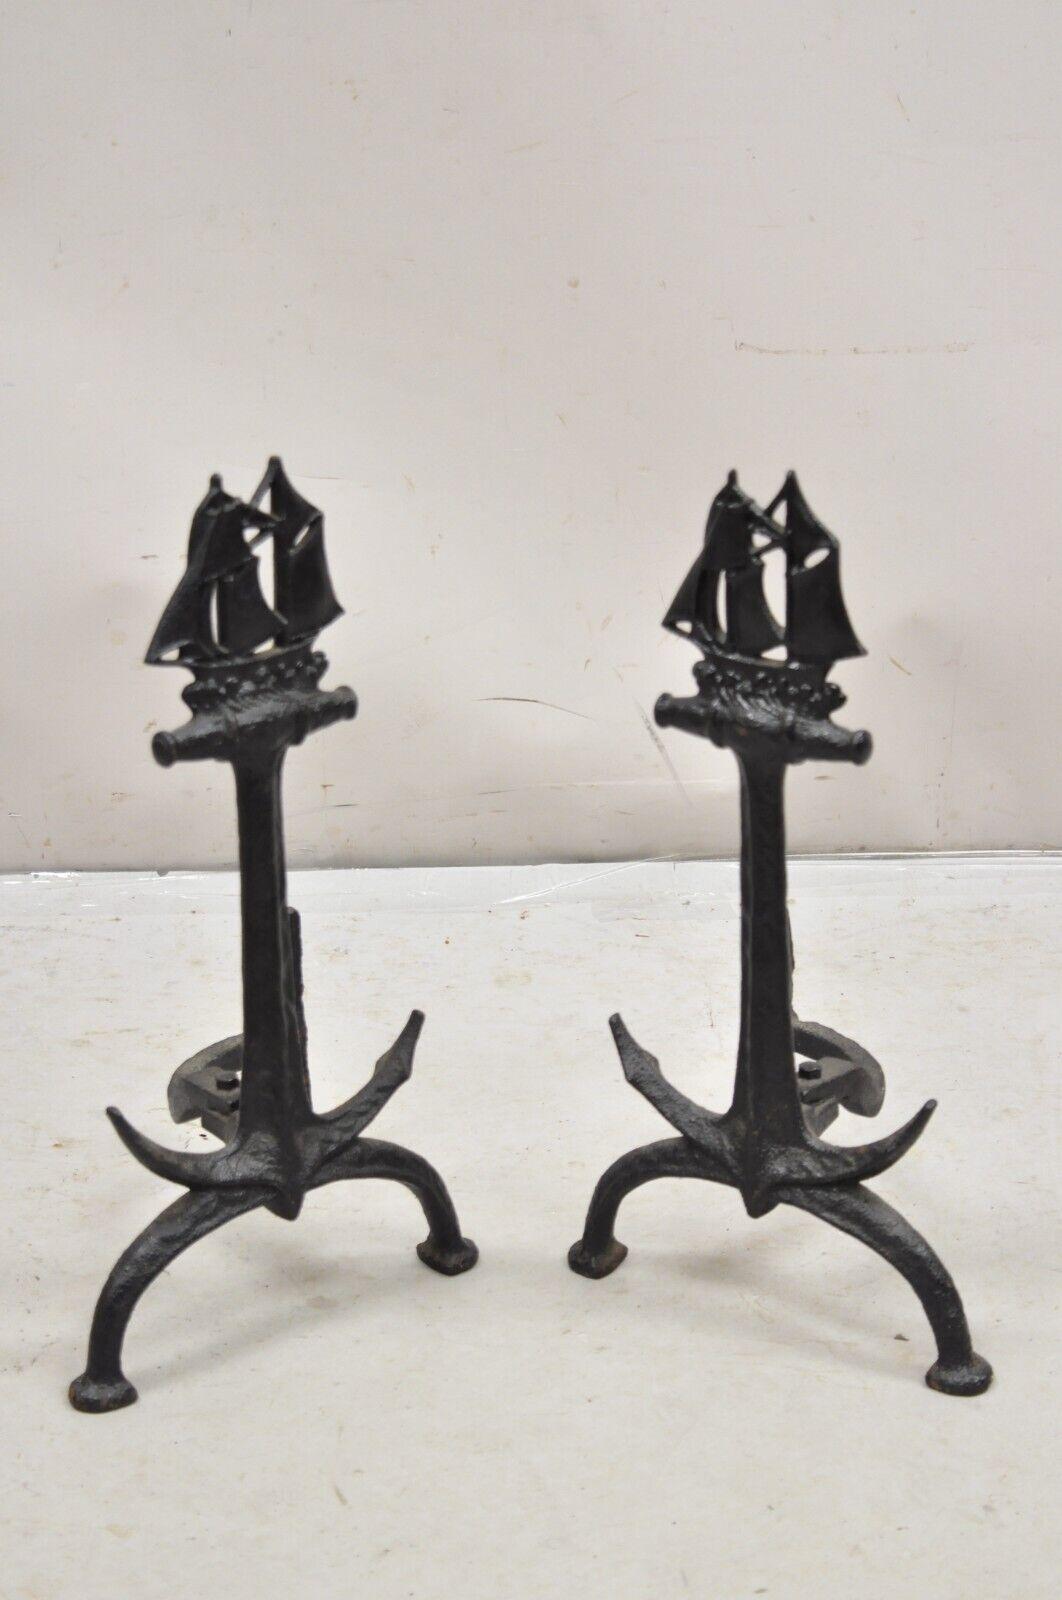 Antique Cast Iron Black Nautical Clipper Ship Anchor Fireplace Andirons - a Pair. Circa early 20th Century. Measurements: 19